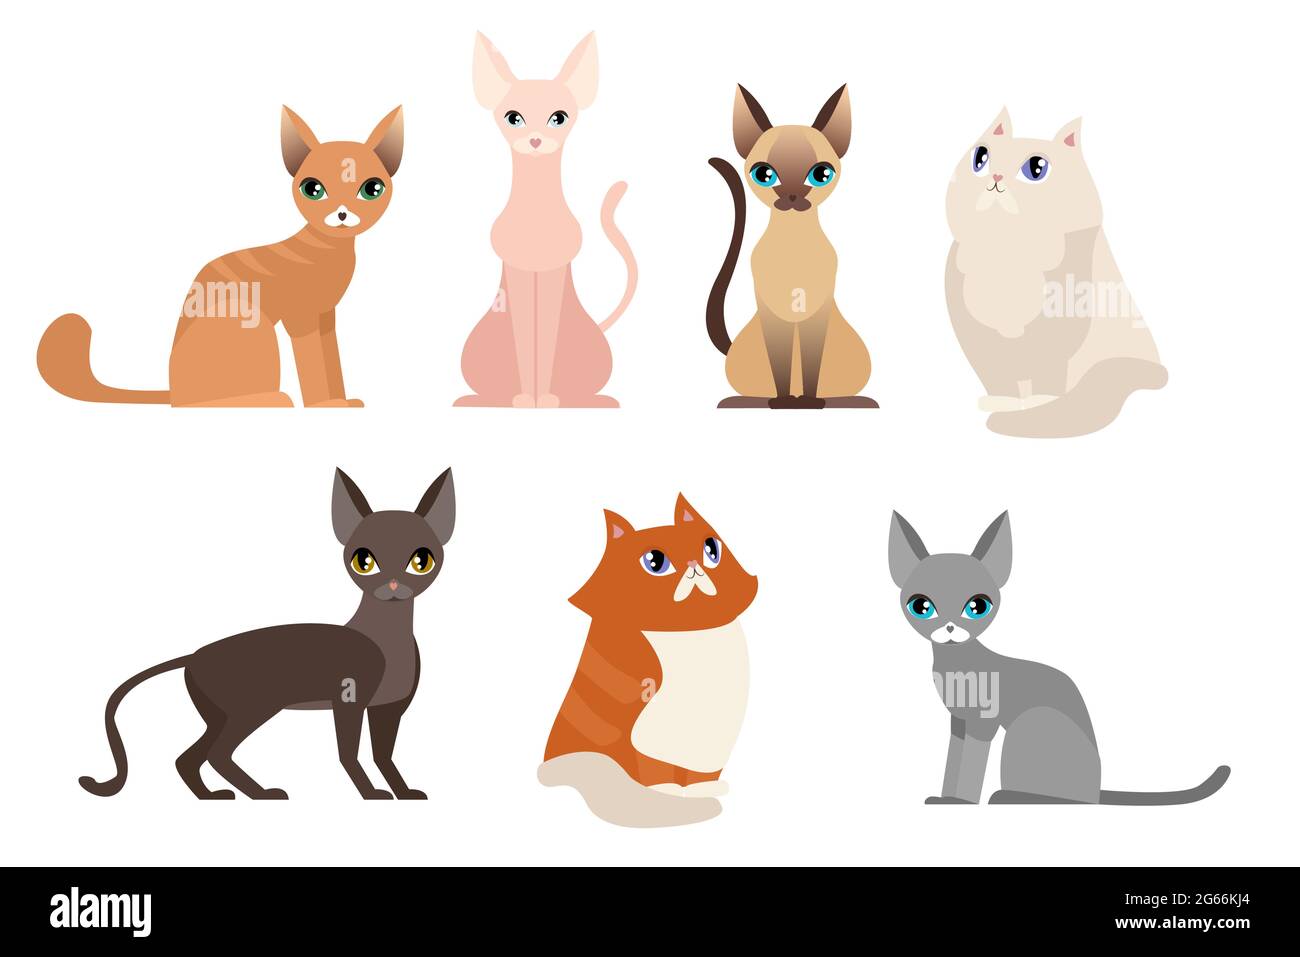 Vector illustration set of different cat breeds, cute pet animal collection, different cats on white background in cartoon flat style. Stock Vector